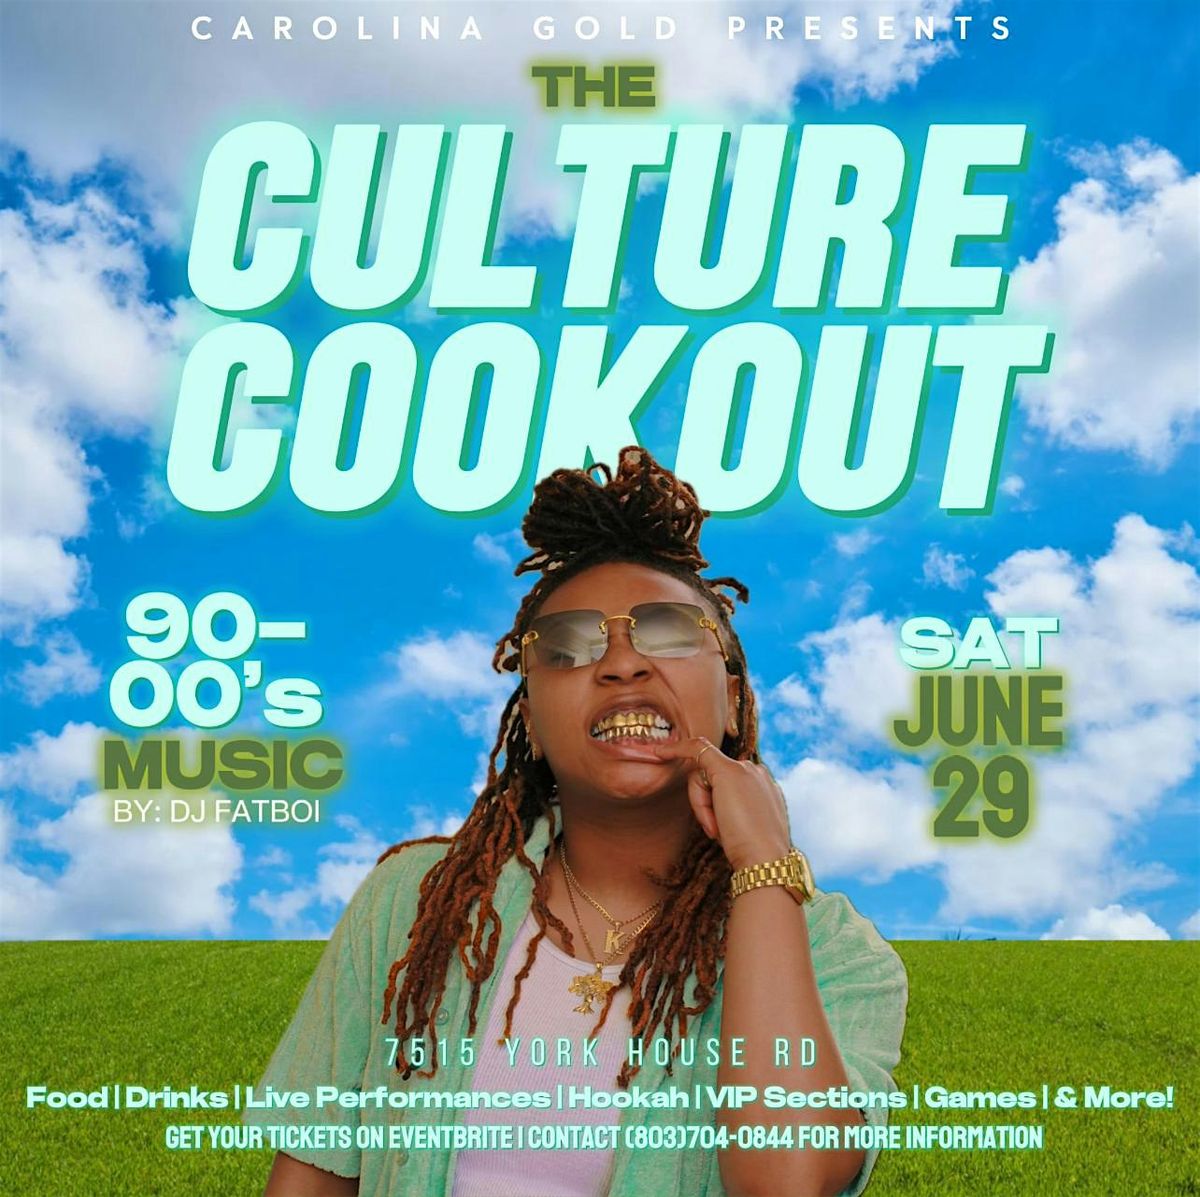 The Culture Cookout